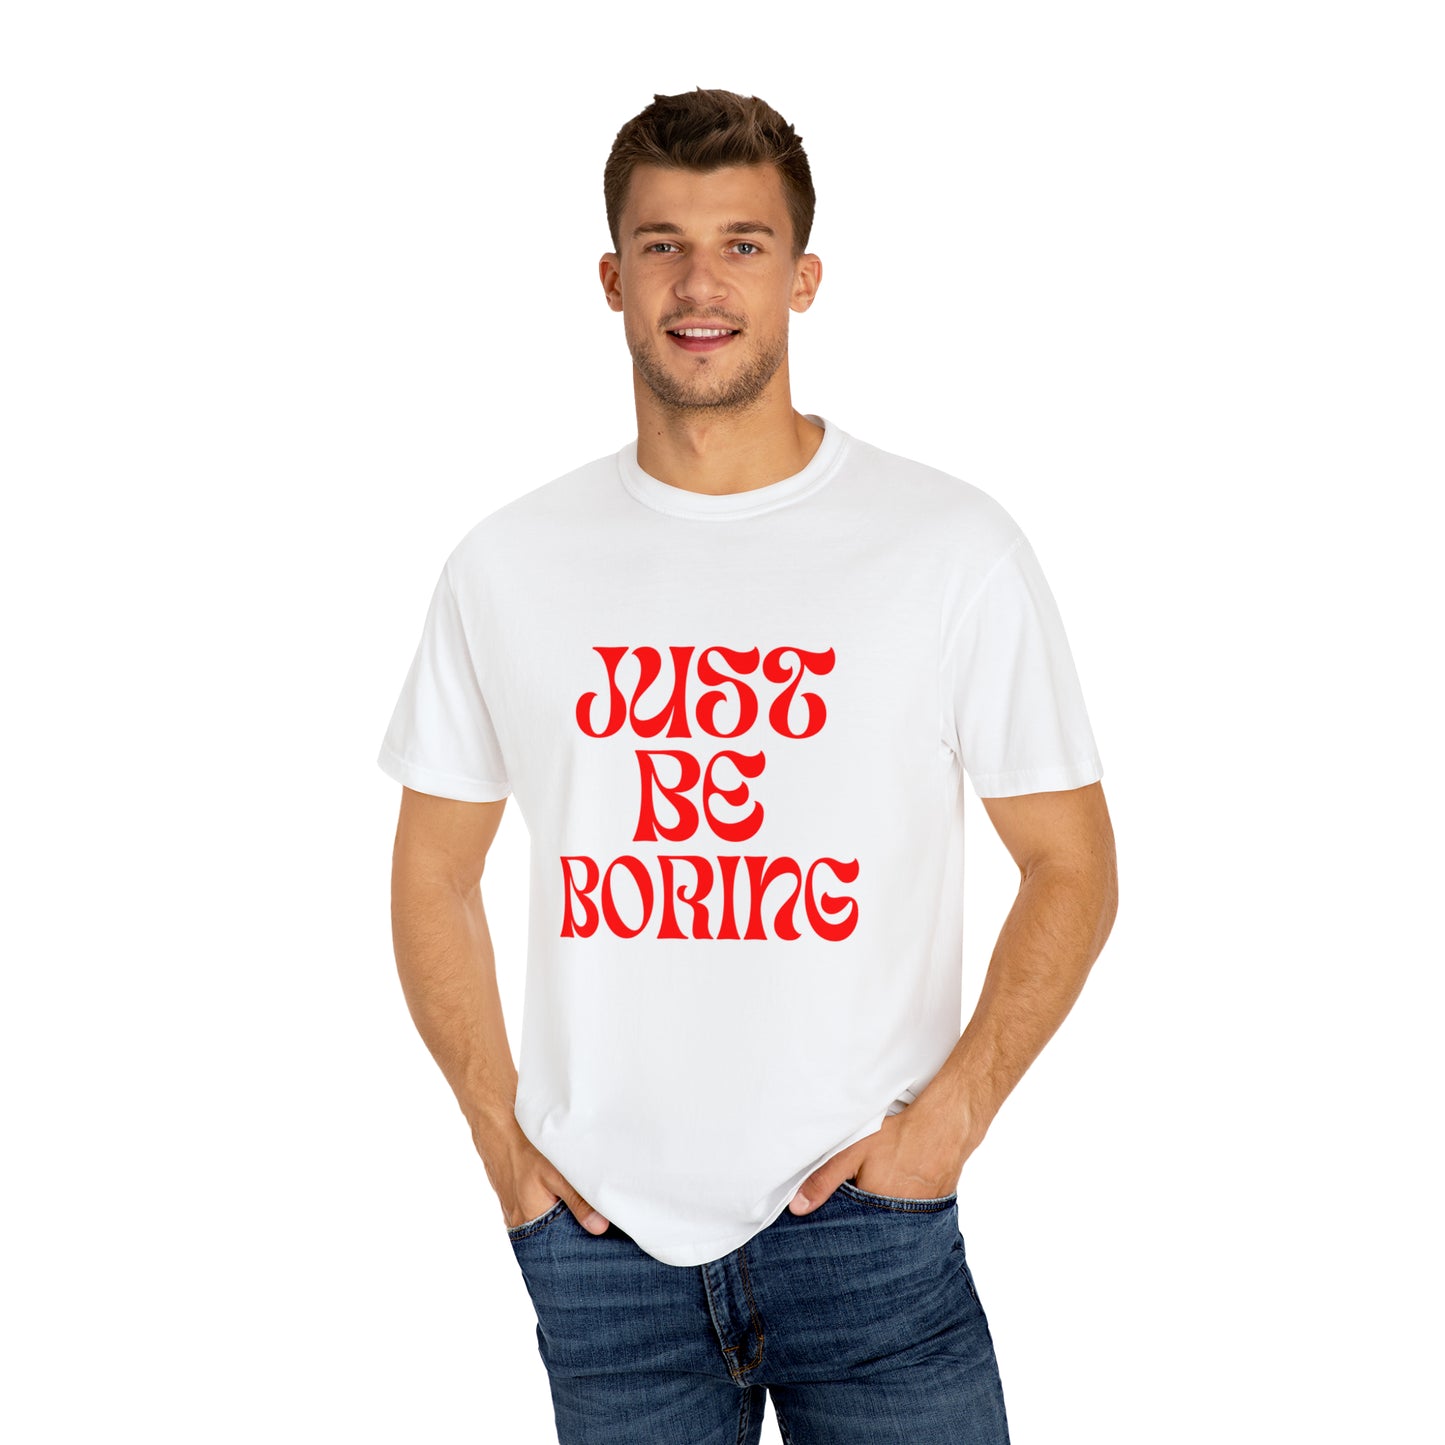 Just Be Boring